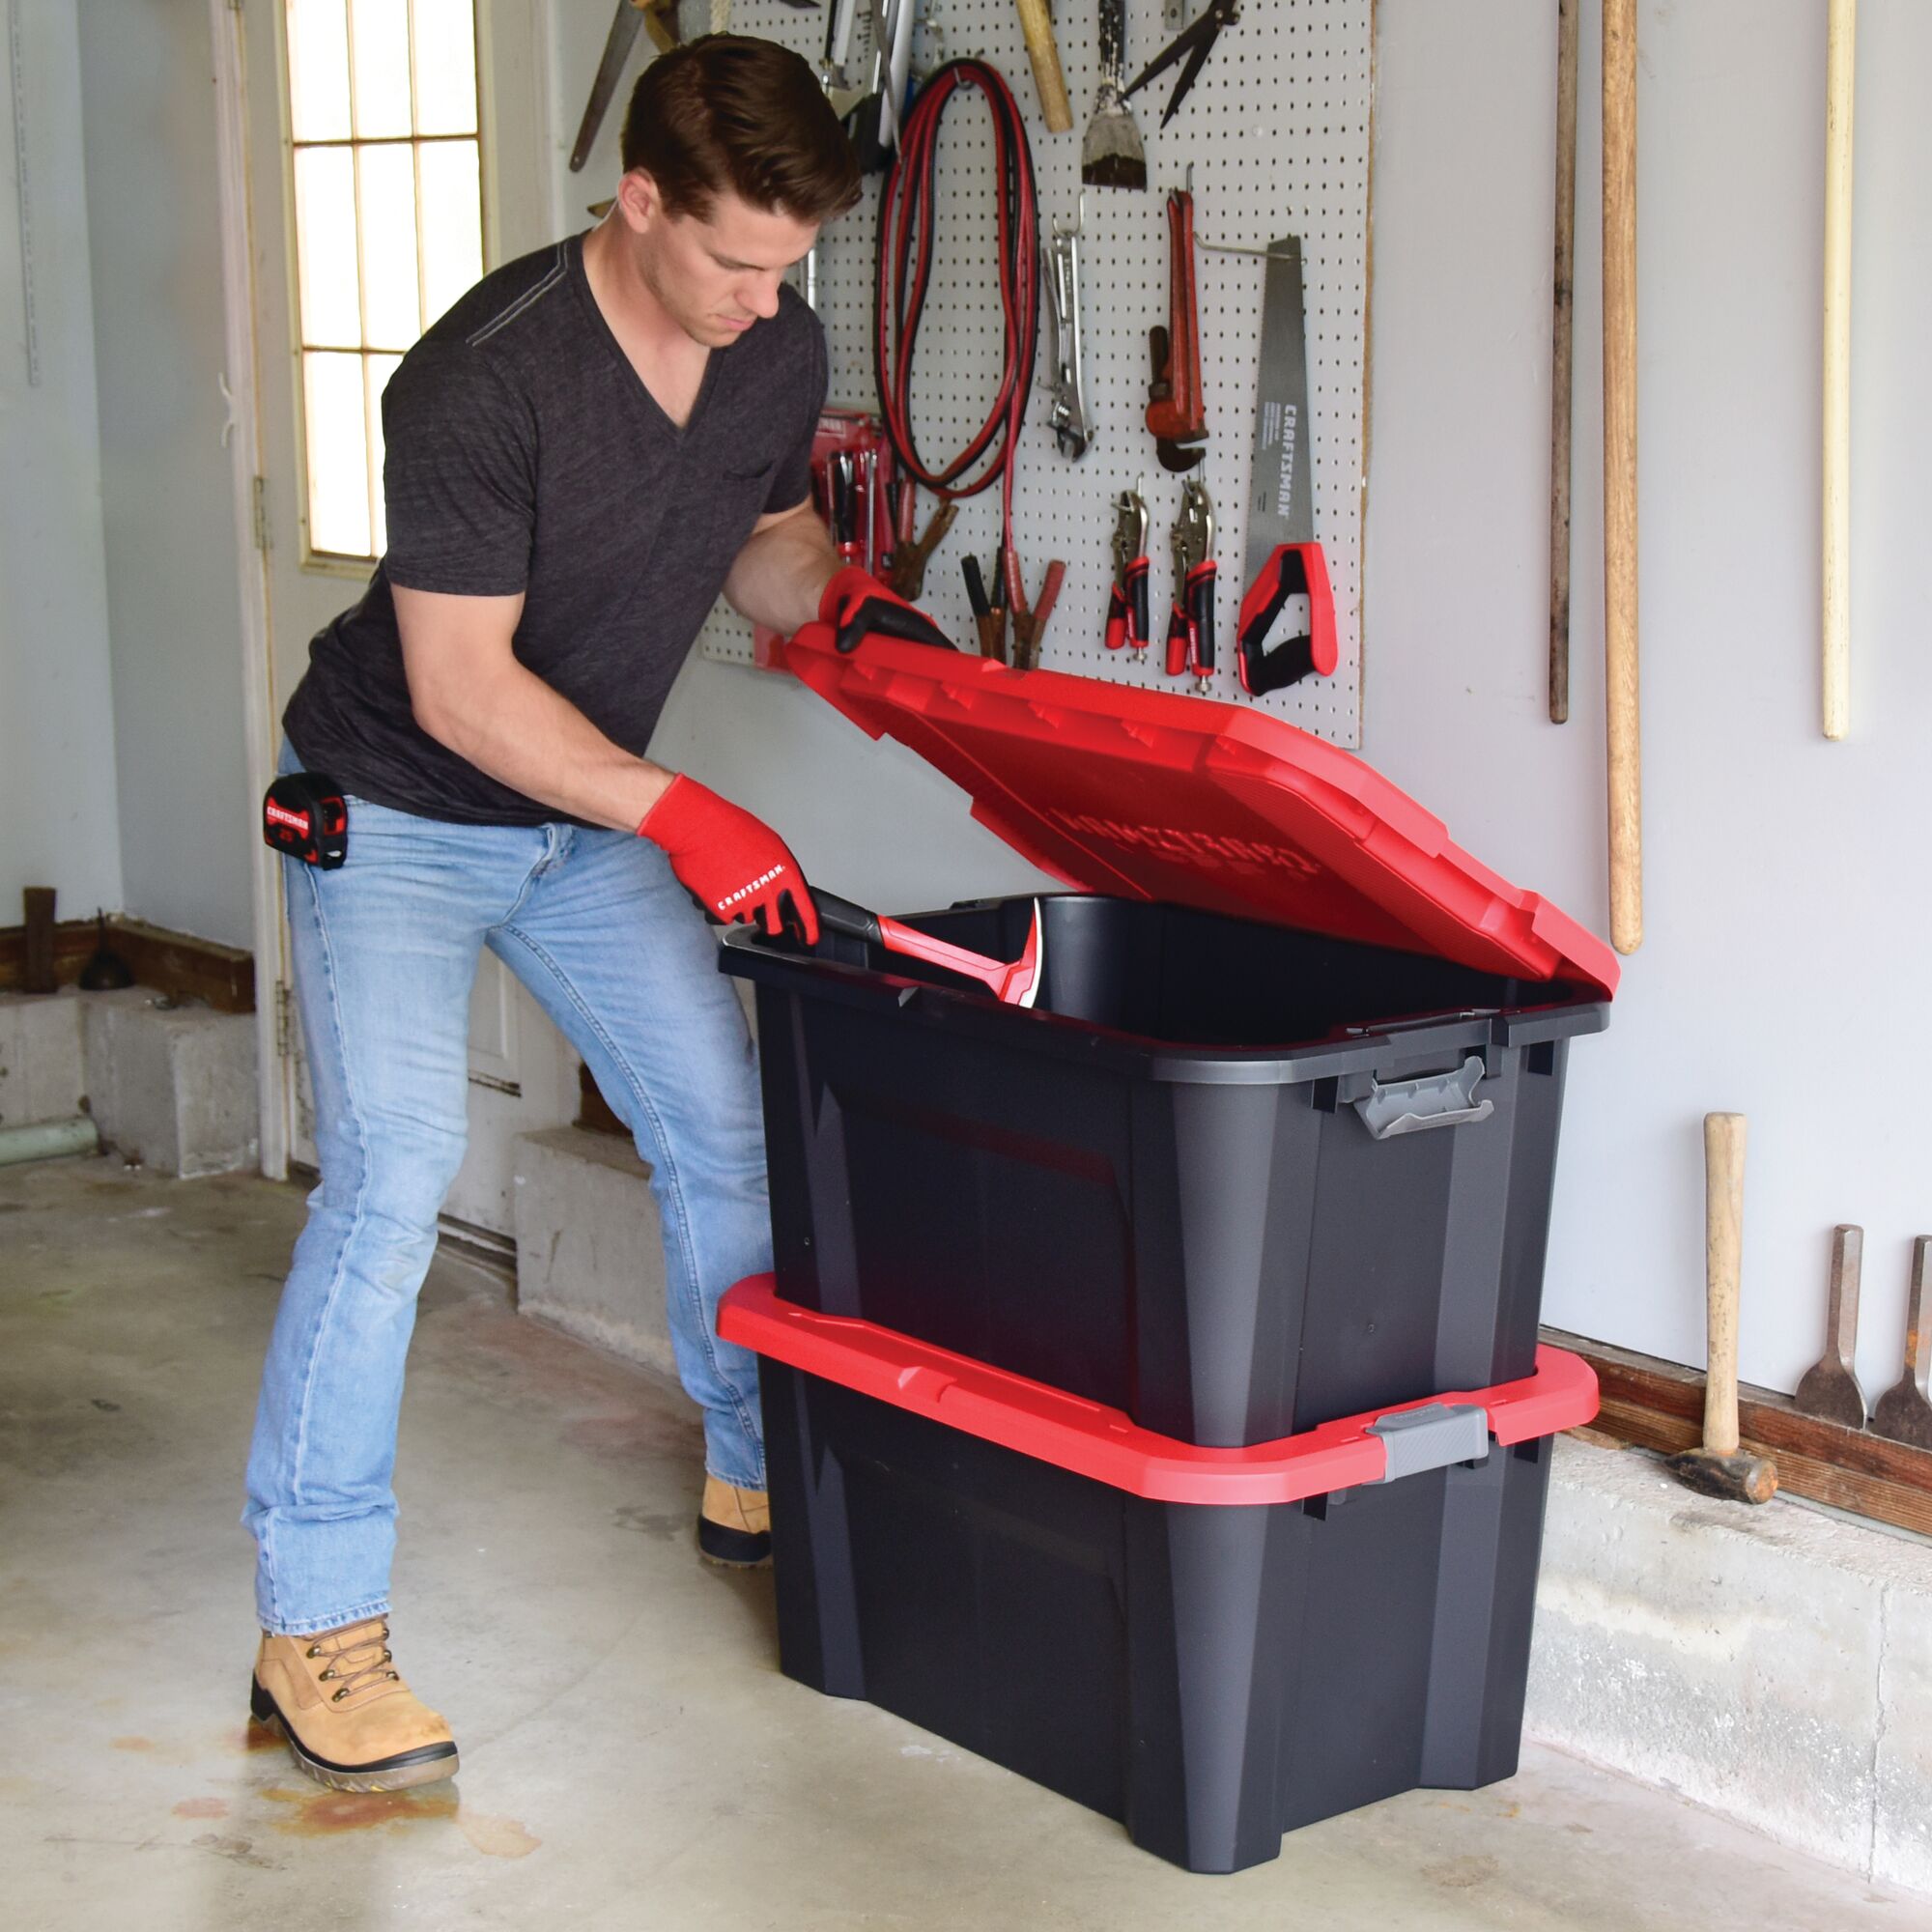 30 Gallon latching tote being used by a person to store tools.